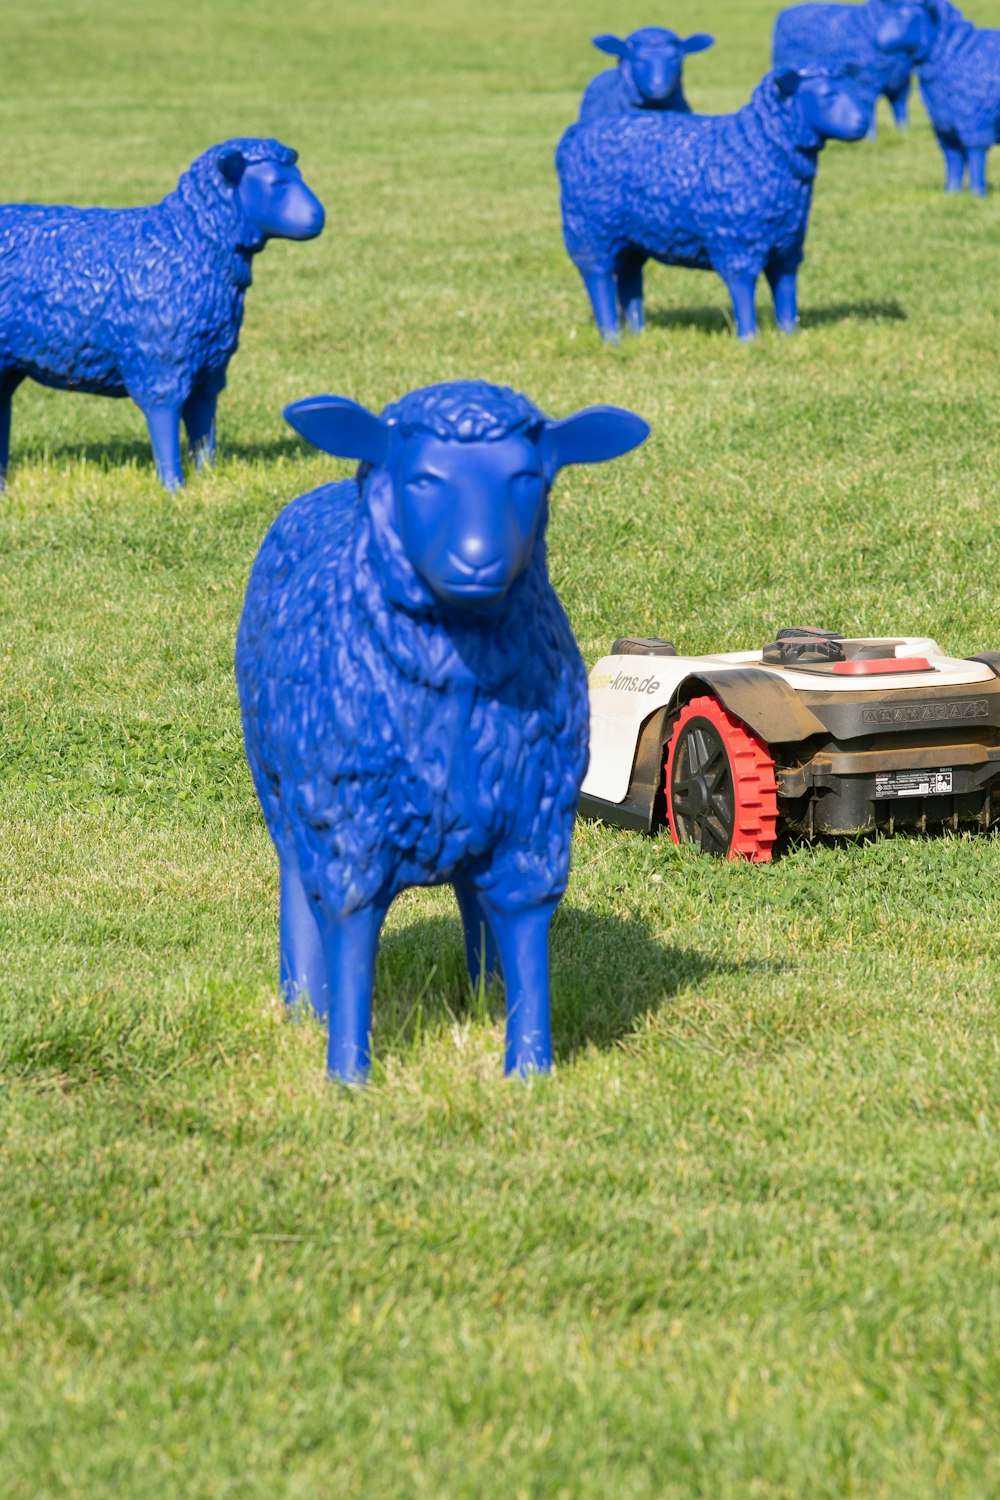 blue animal statue on green grass field during daytime